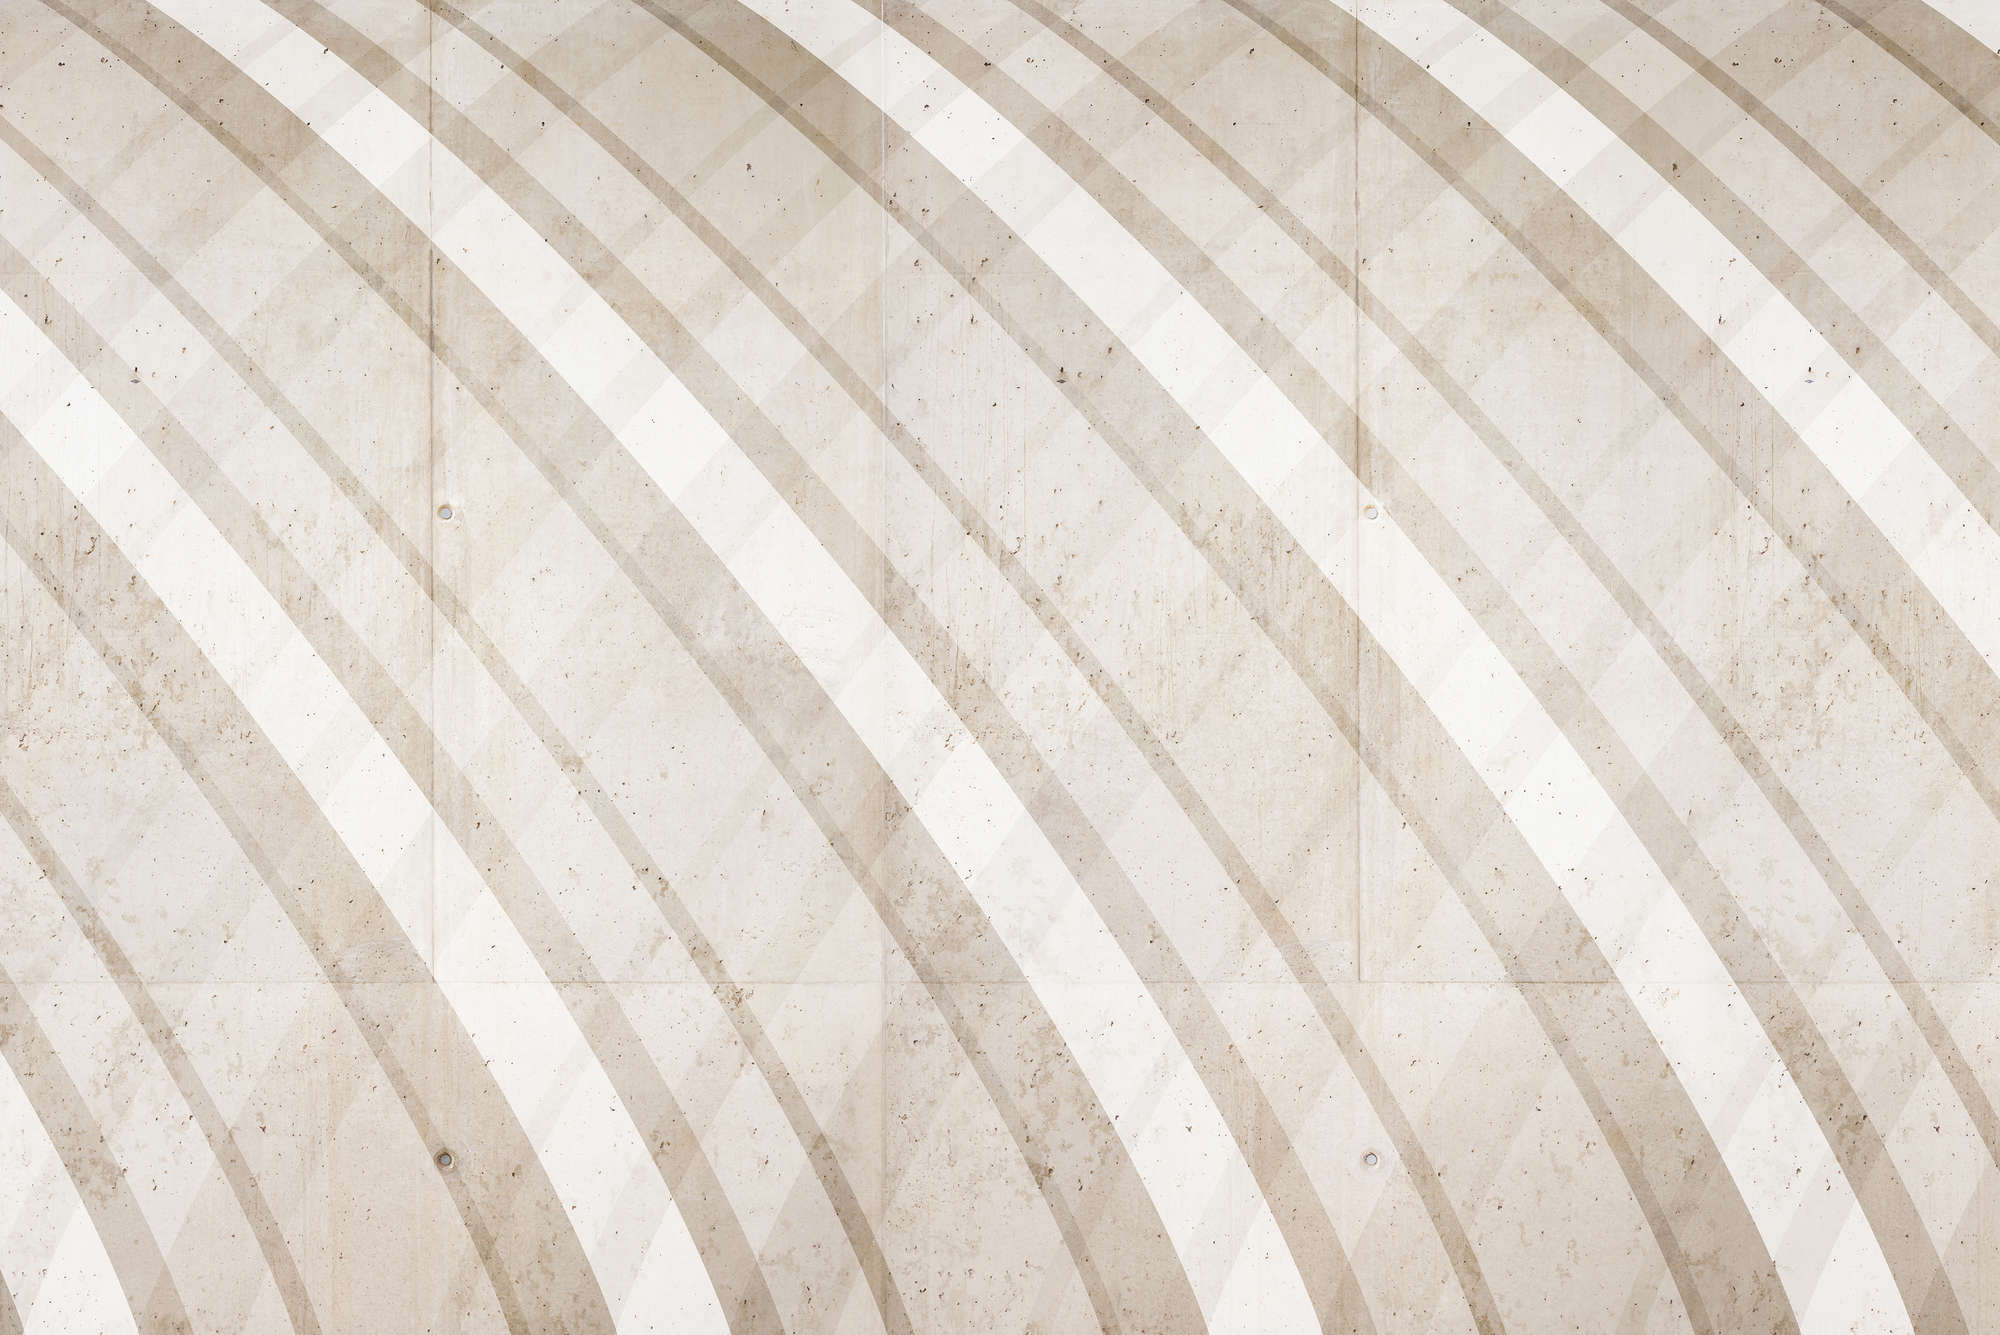             Graphic wall mural with round stripe pattern beige on textured non-woven
        